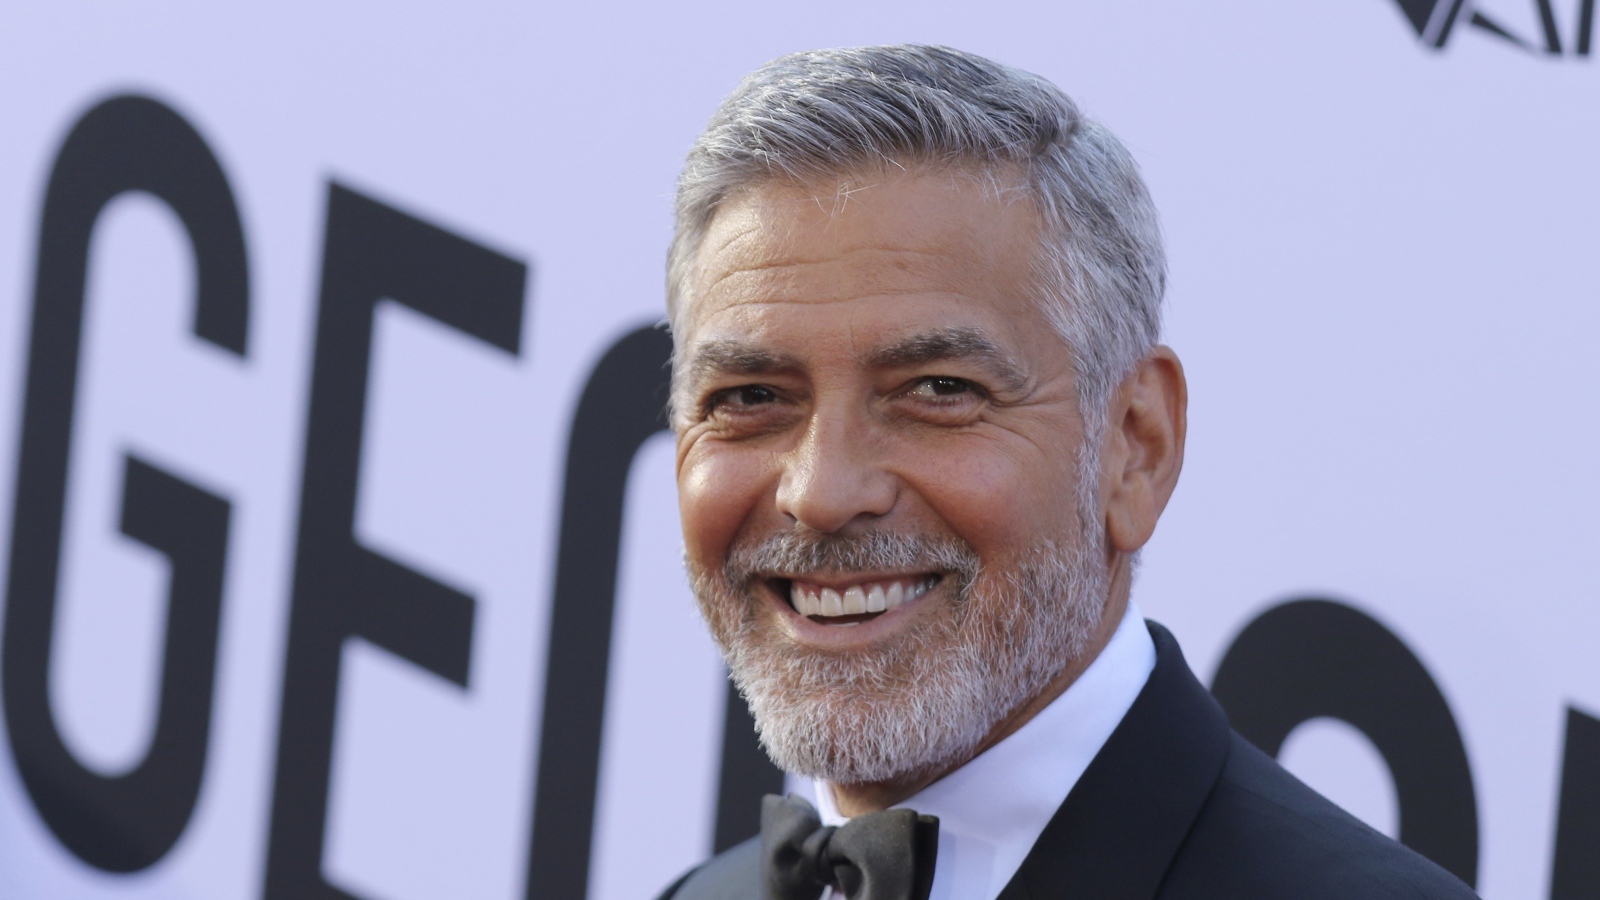 Smiling male actor George Clooney